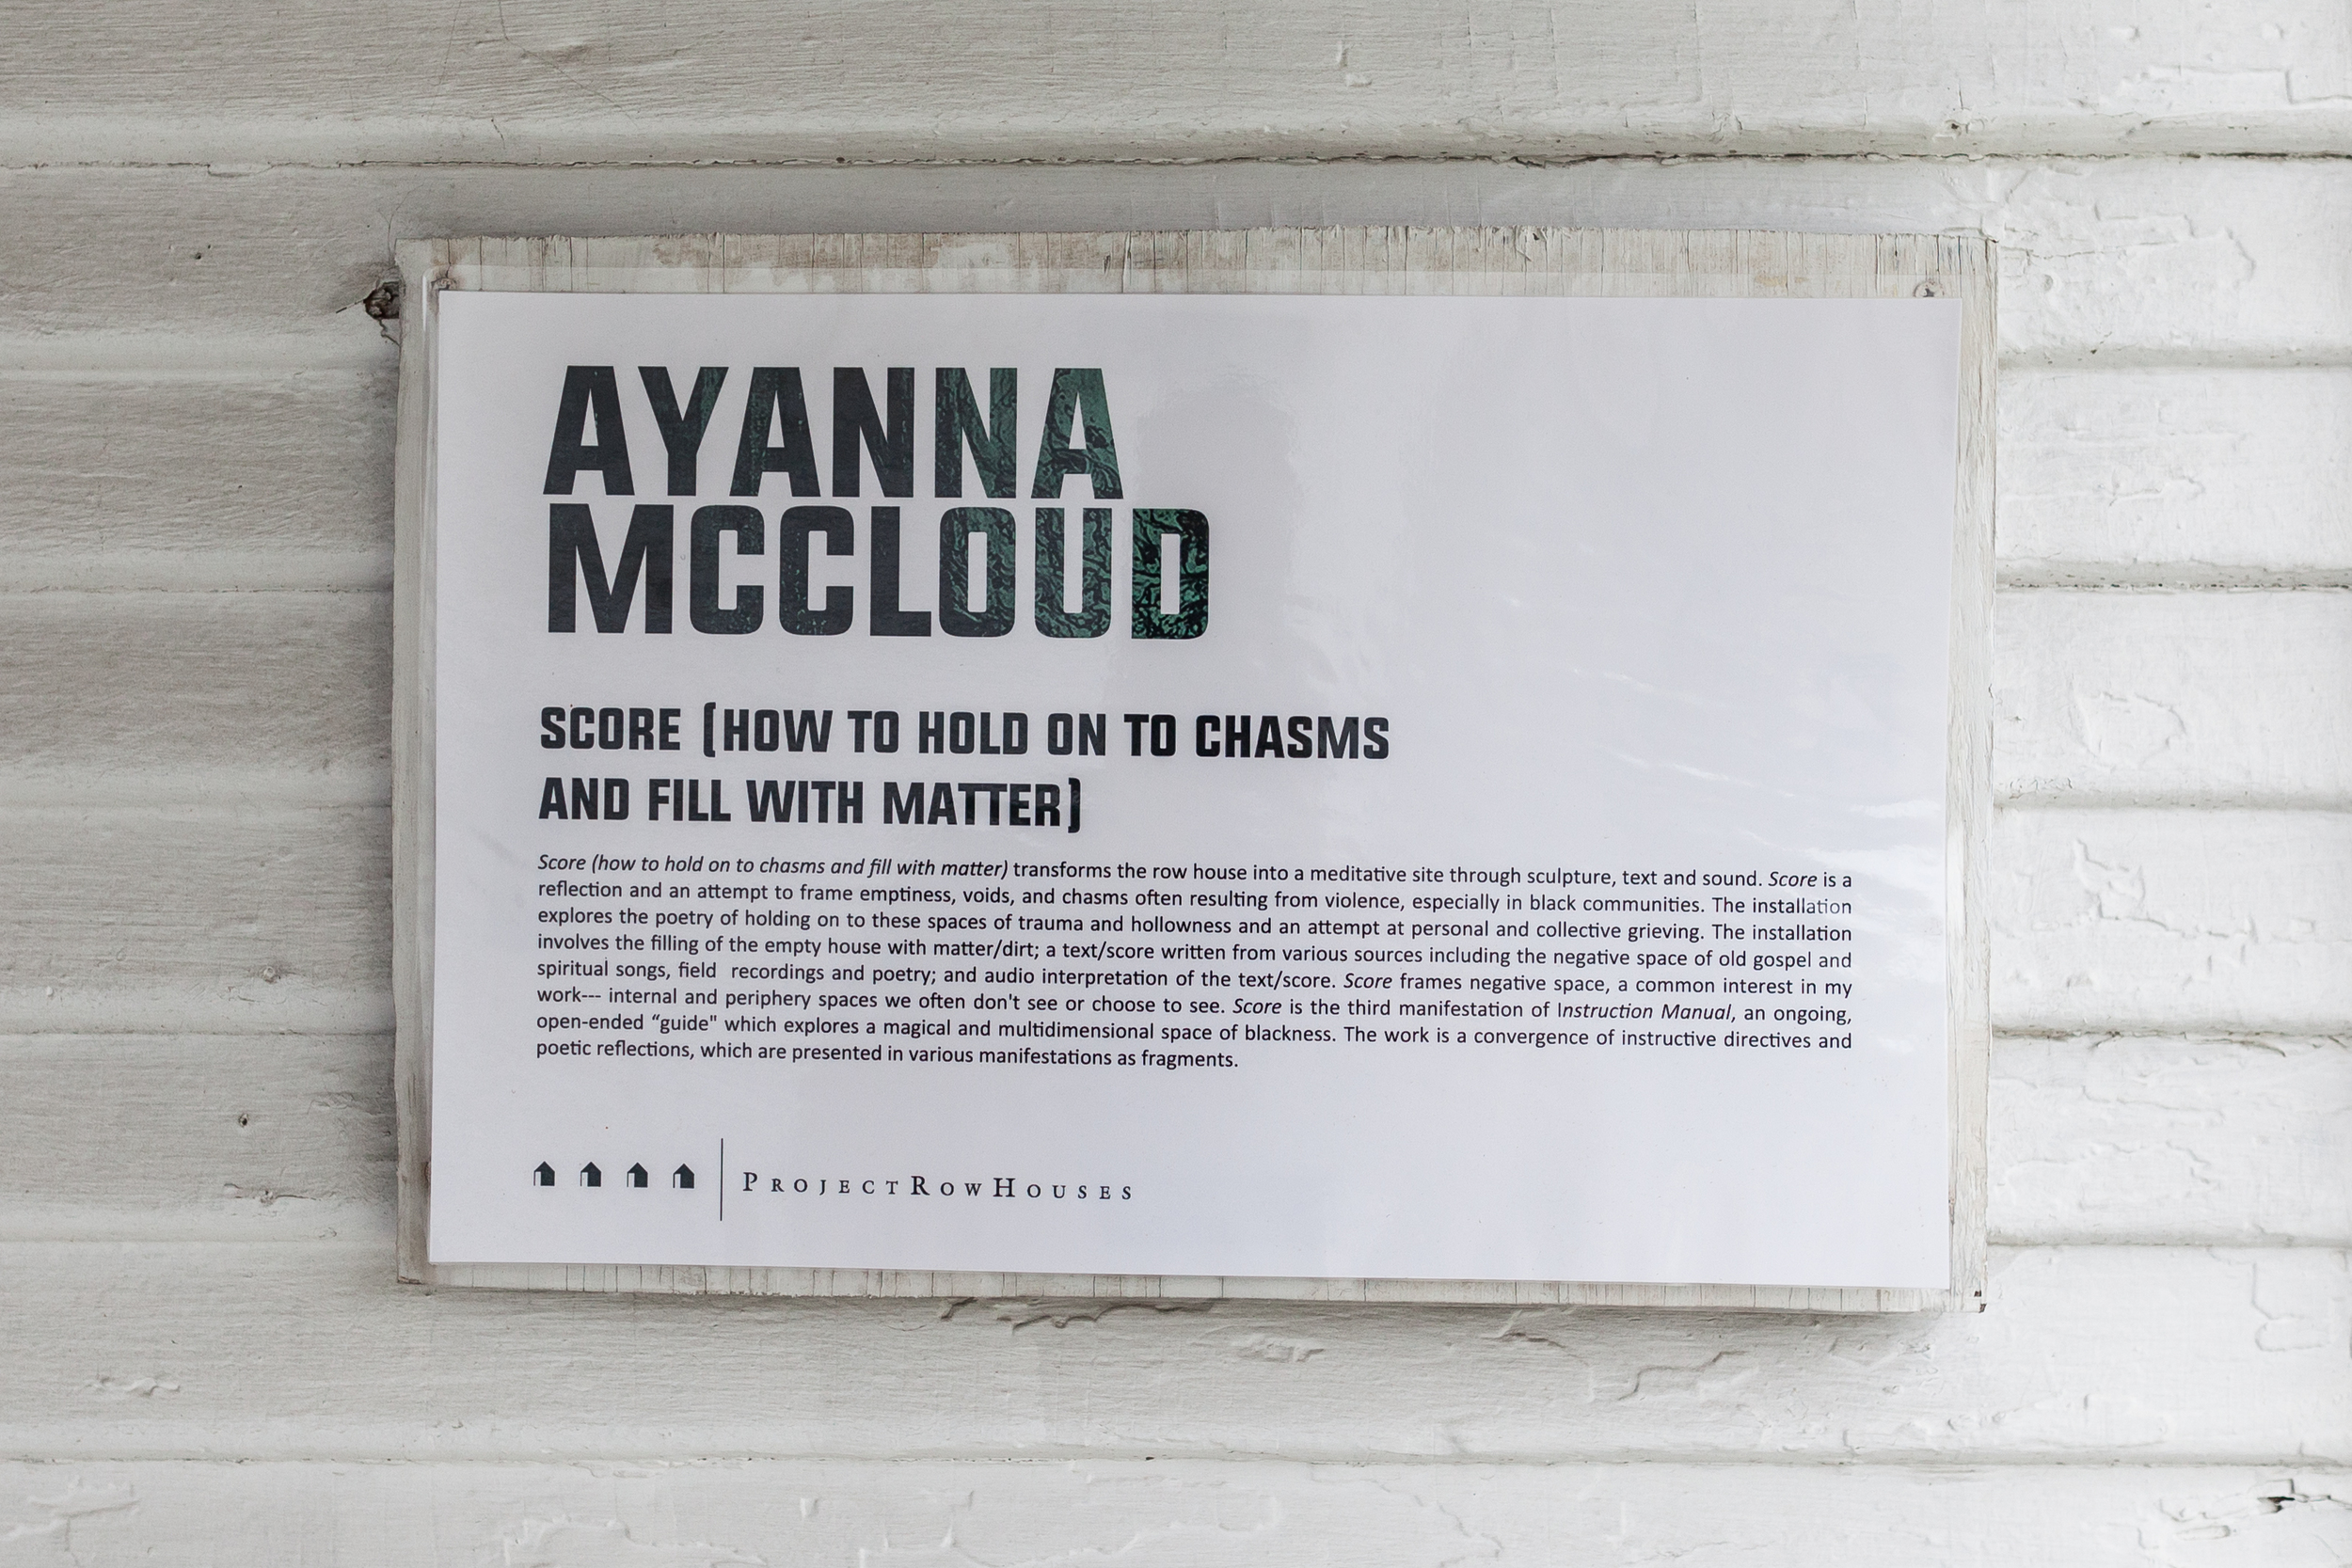  Ayanna Jolivet Mccloud, Score (how to hold on to chasms and fill with matter) 